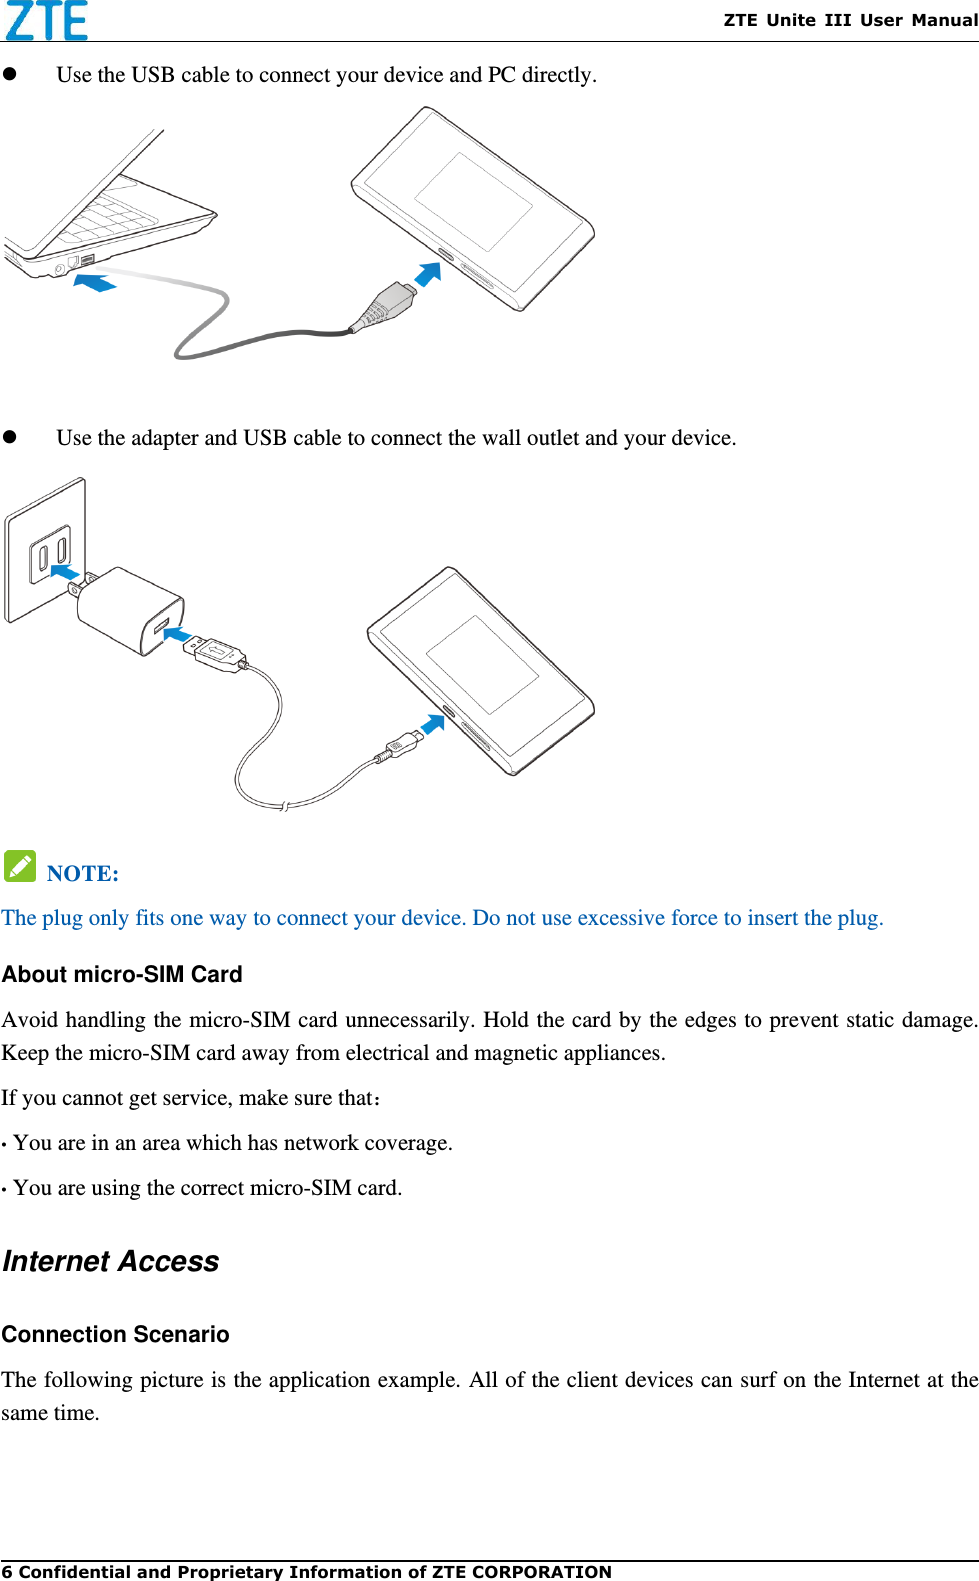    ZTE  Unite  III  User  Manual 6 Confidential and Proprietary Information of ZTE CORPORATION    Use the USB cable to connect your device and PC directly.      Use the adapter and USB cable to connect the wall outlet and your device.    NOTE:  The plug only fits one way to connect your device. Do not use excessive force to insert the plug.   About micro-SIM Card Avoid handling the micro-SIM card unnecessarily. Hold the card by the edges to prevent static damage. Keep the micro-SIM card away from electrical and magnetic appliances. If you cannot get service, make sure that： • You are in an area which has network coverage. • You are using the correct micro-SIM card. Internet Access Connection Scenario The following picture is the application example. All of the client devices can surf on the Internet at the same time.    